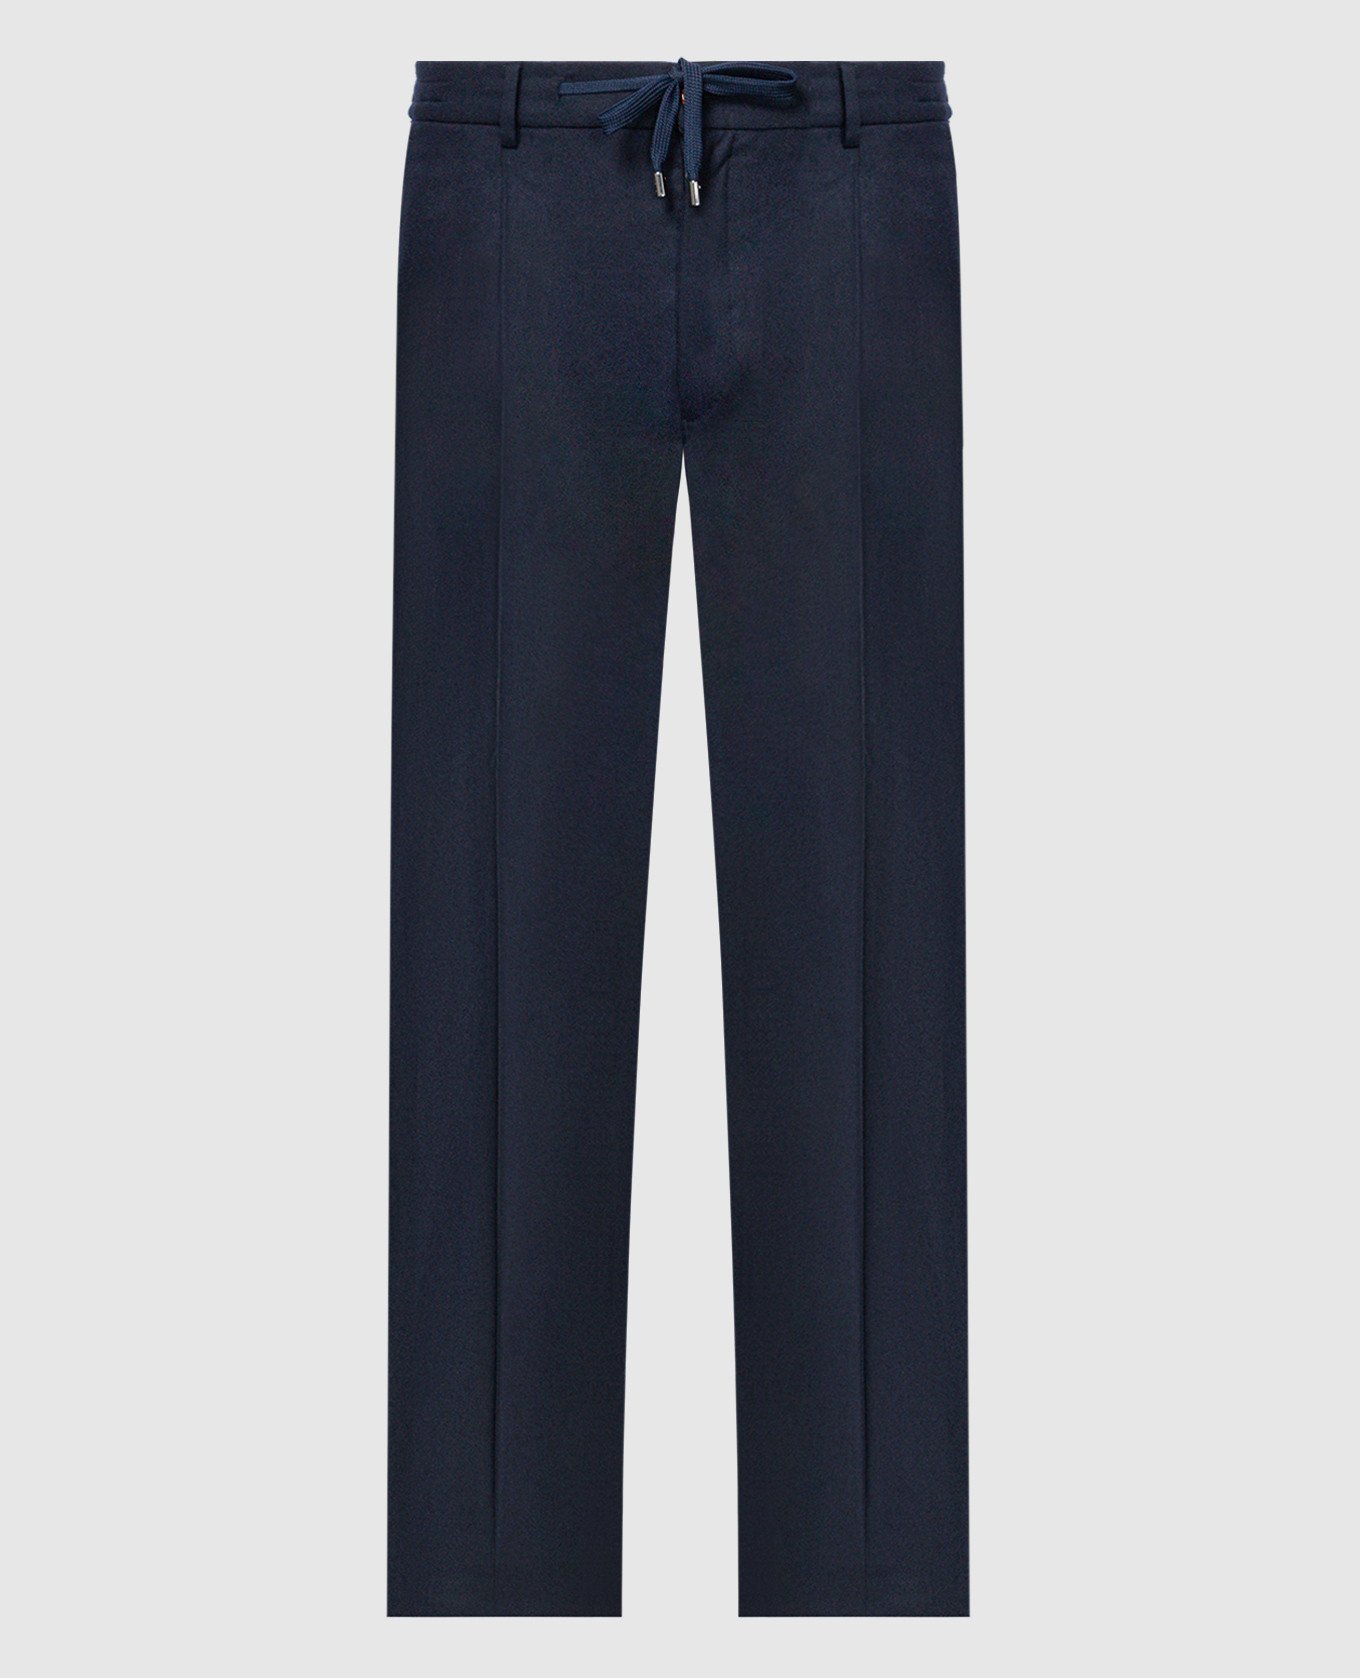 Anton-FSR blue wool and cashmere trousers